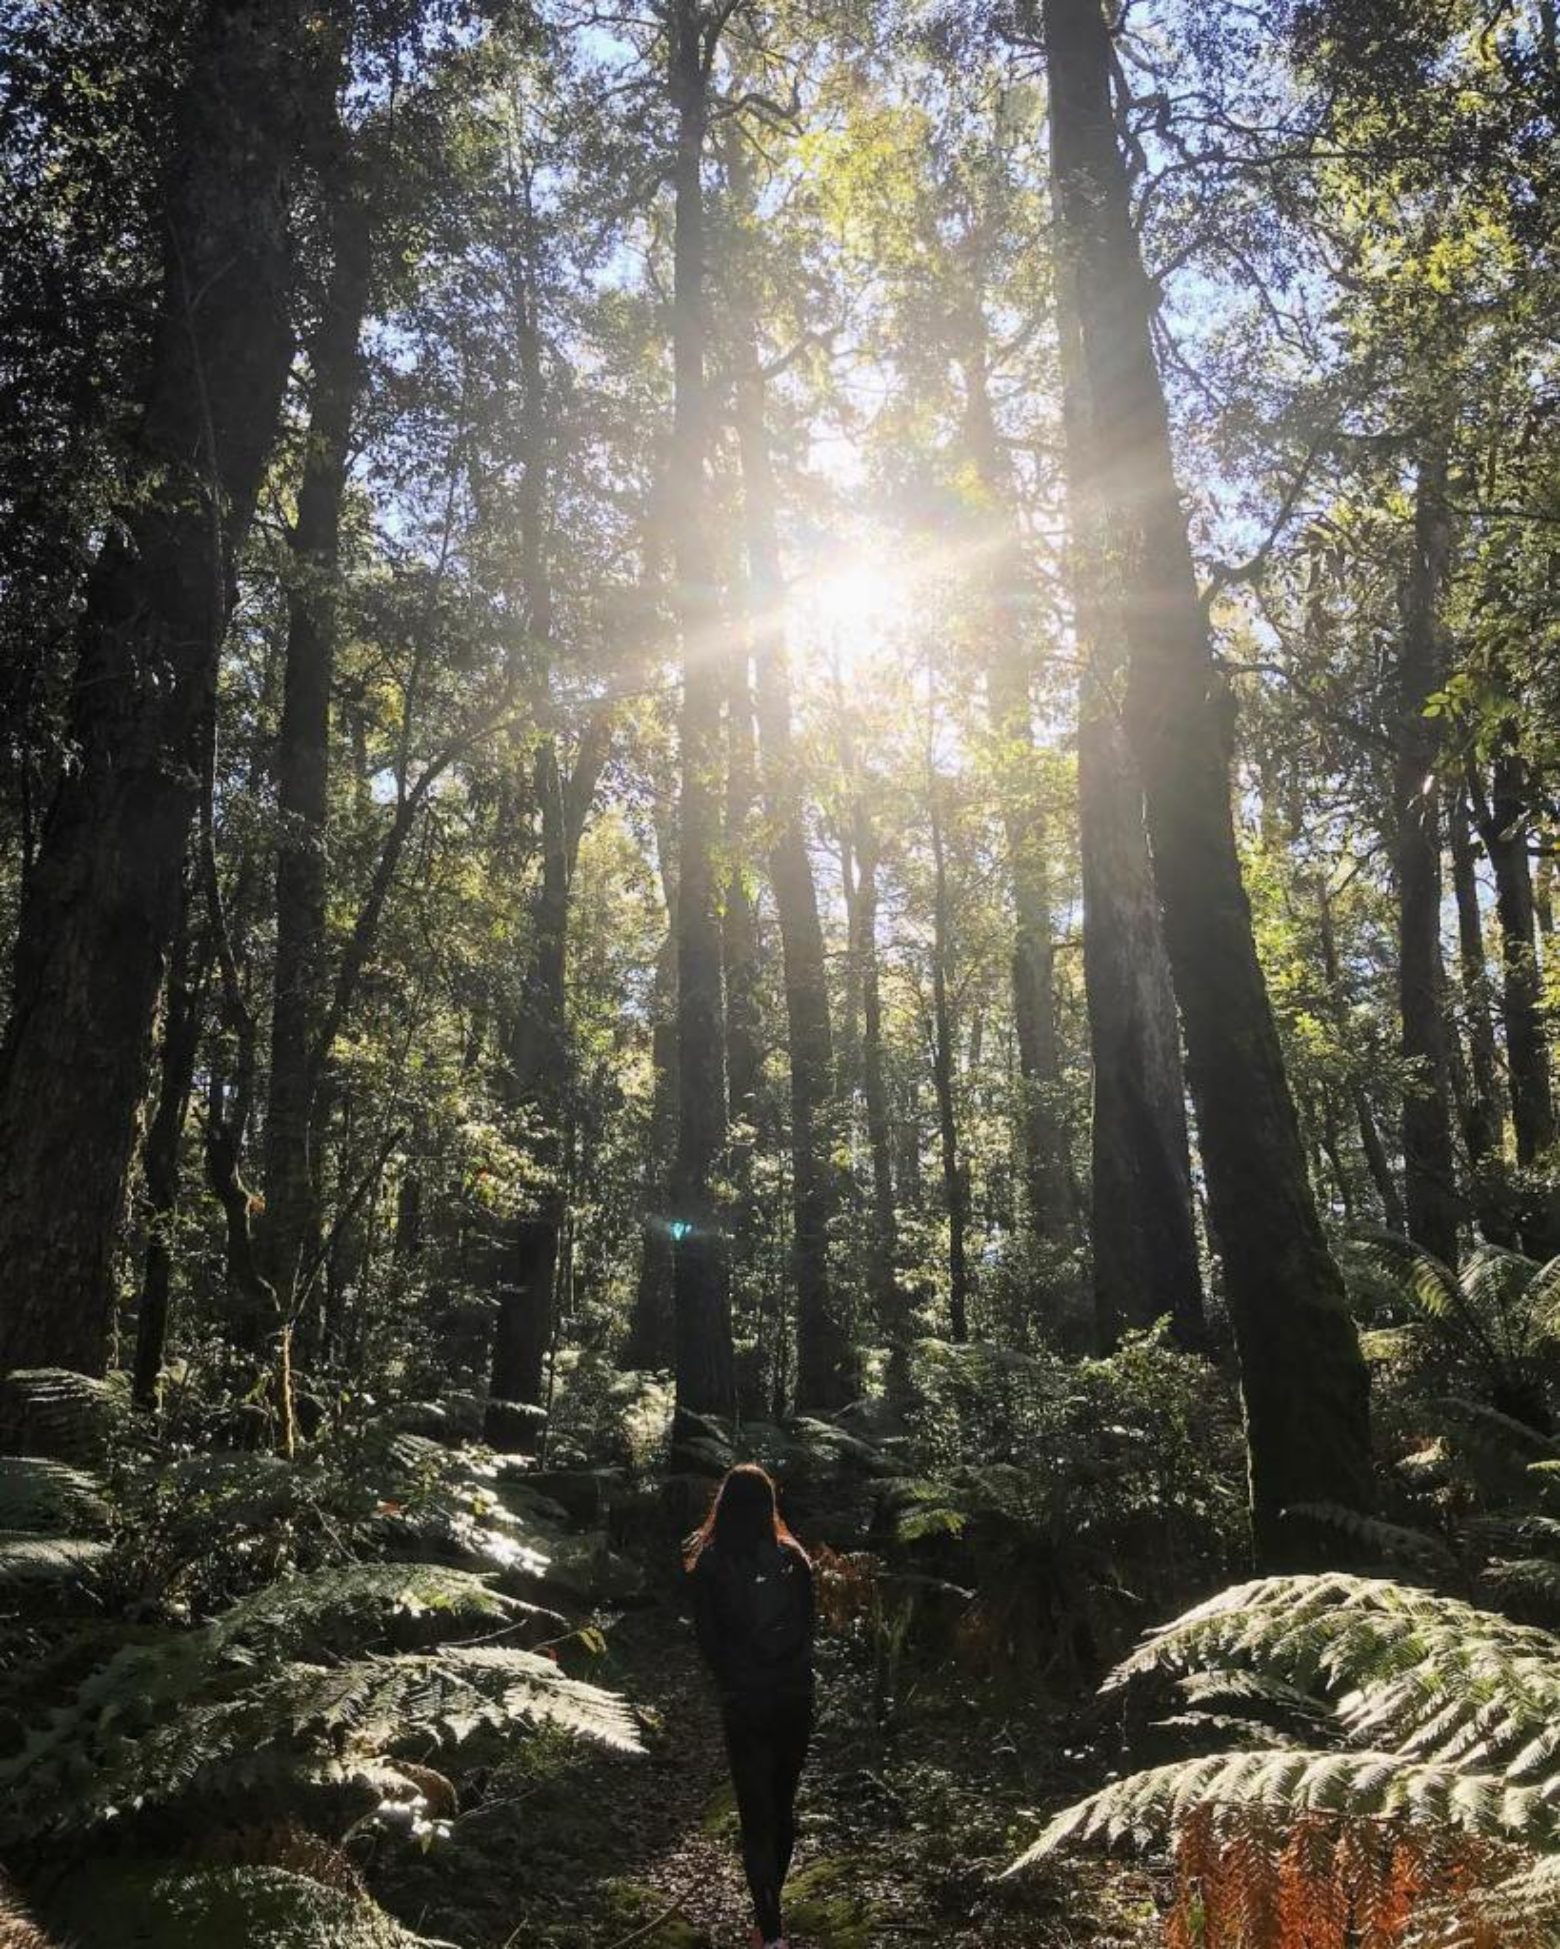 Barrington Tops forest in sunlight (photo by @em_woodley)